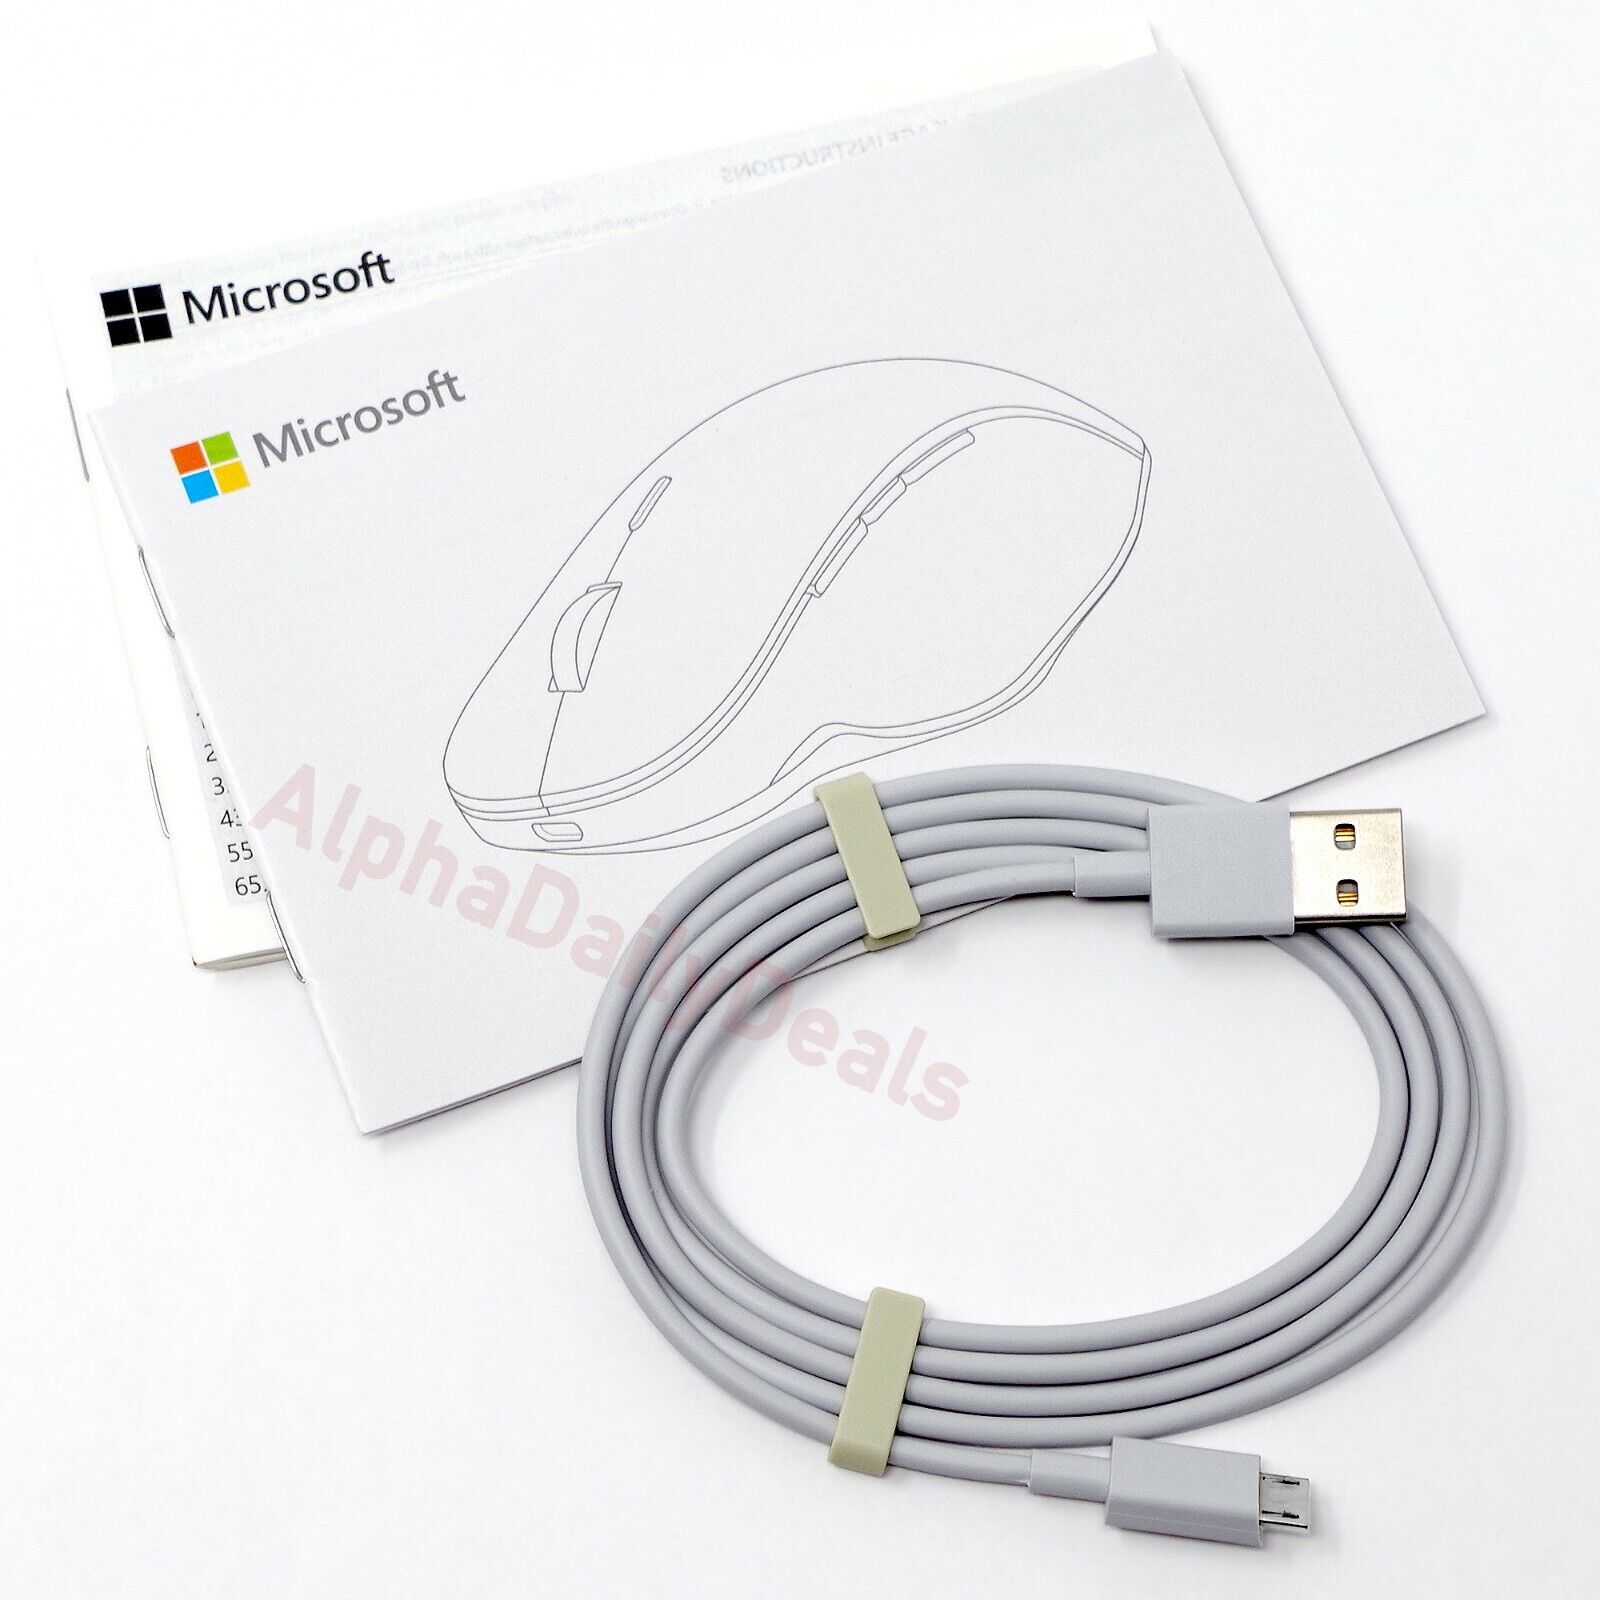 Microsoft Surface Precision Wireless Mouse Rechargeable Laptop Light Gray